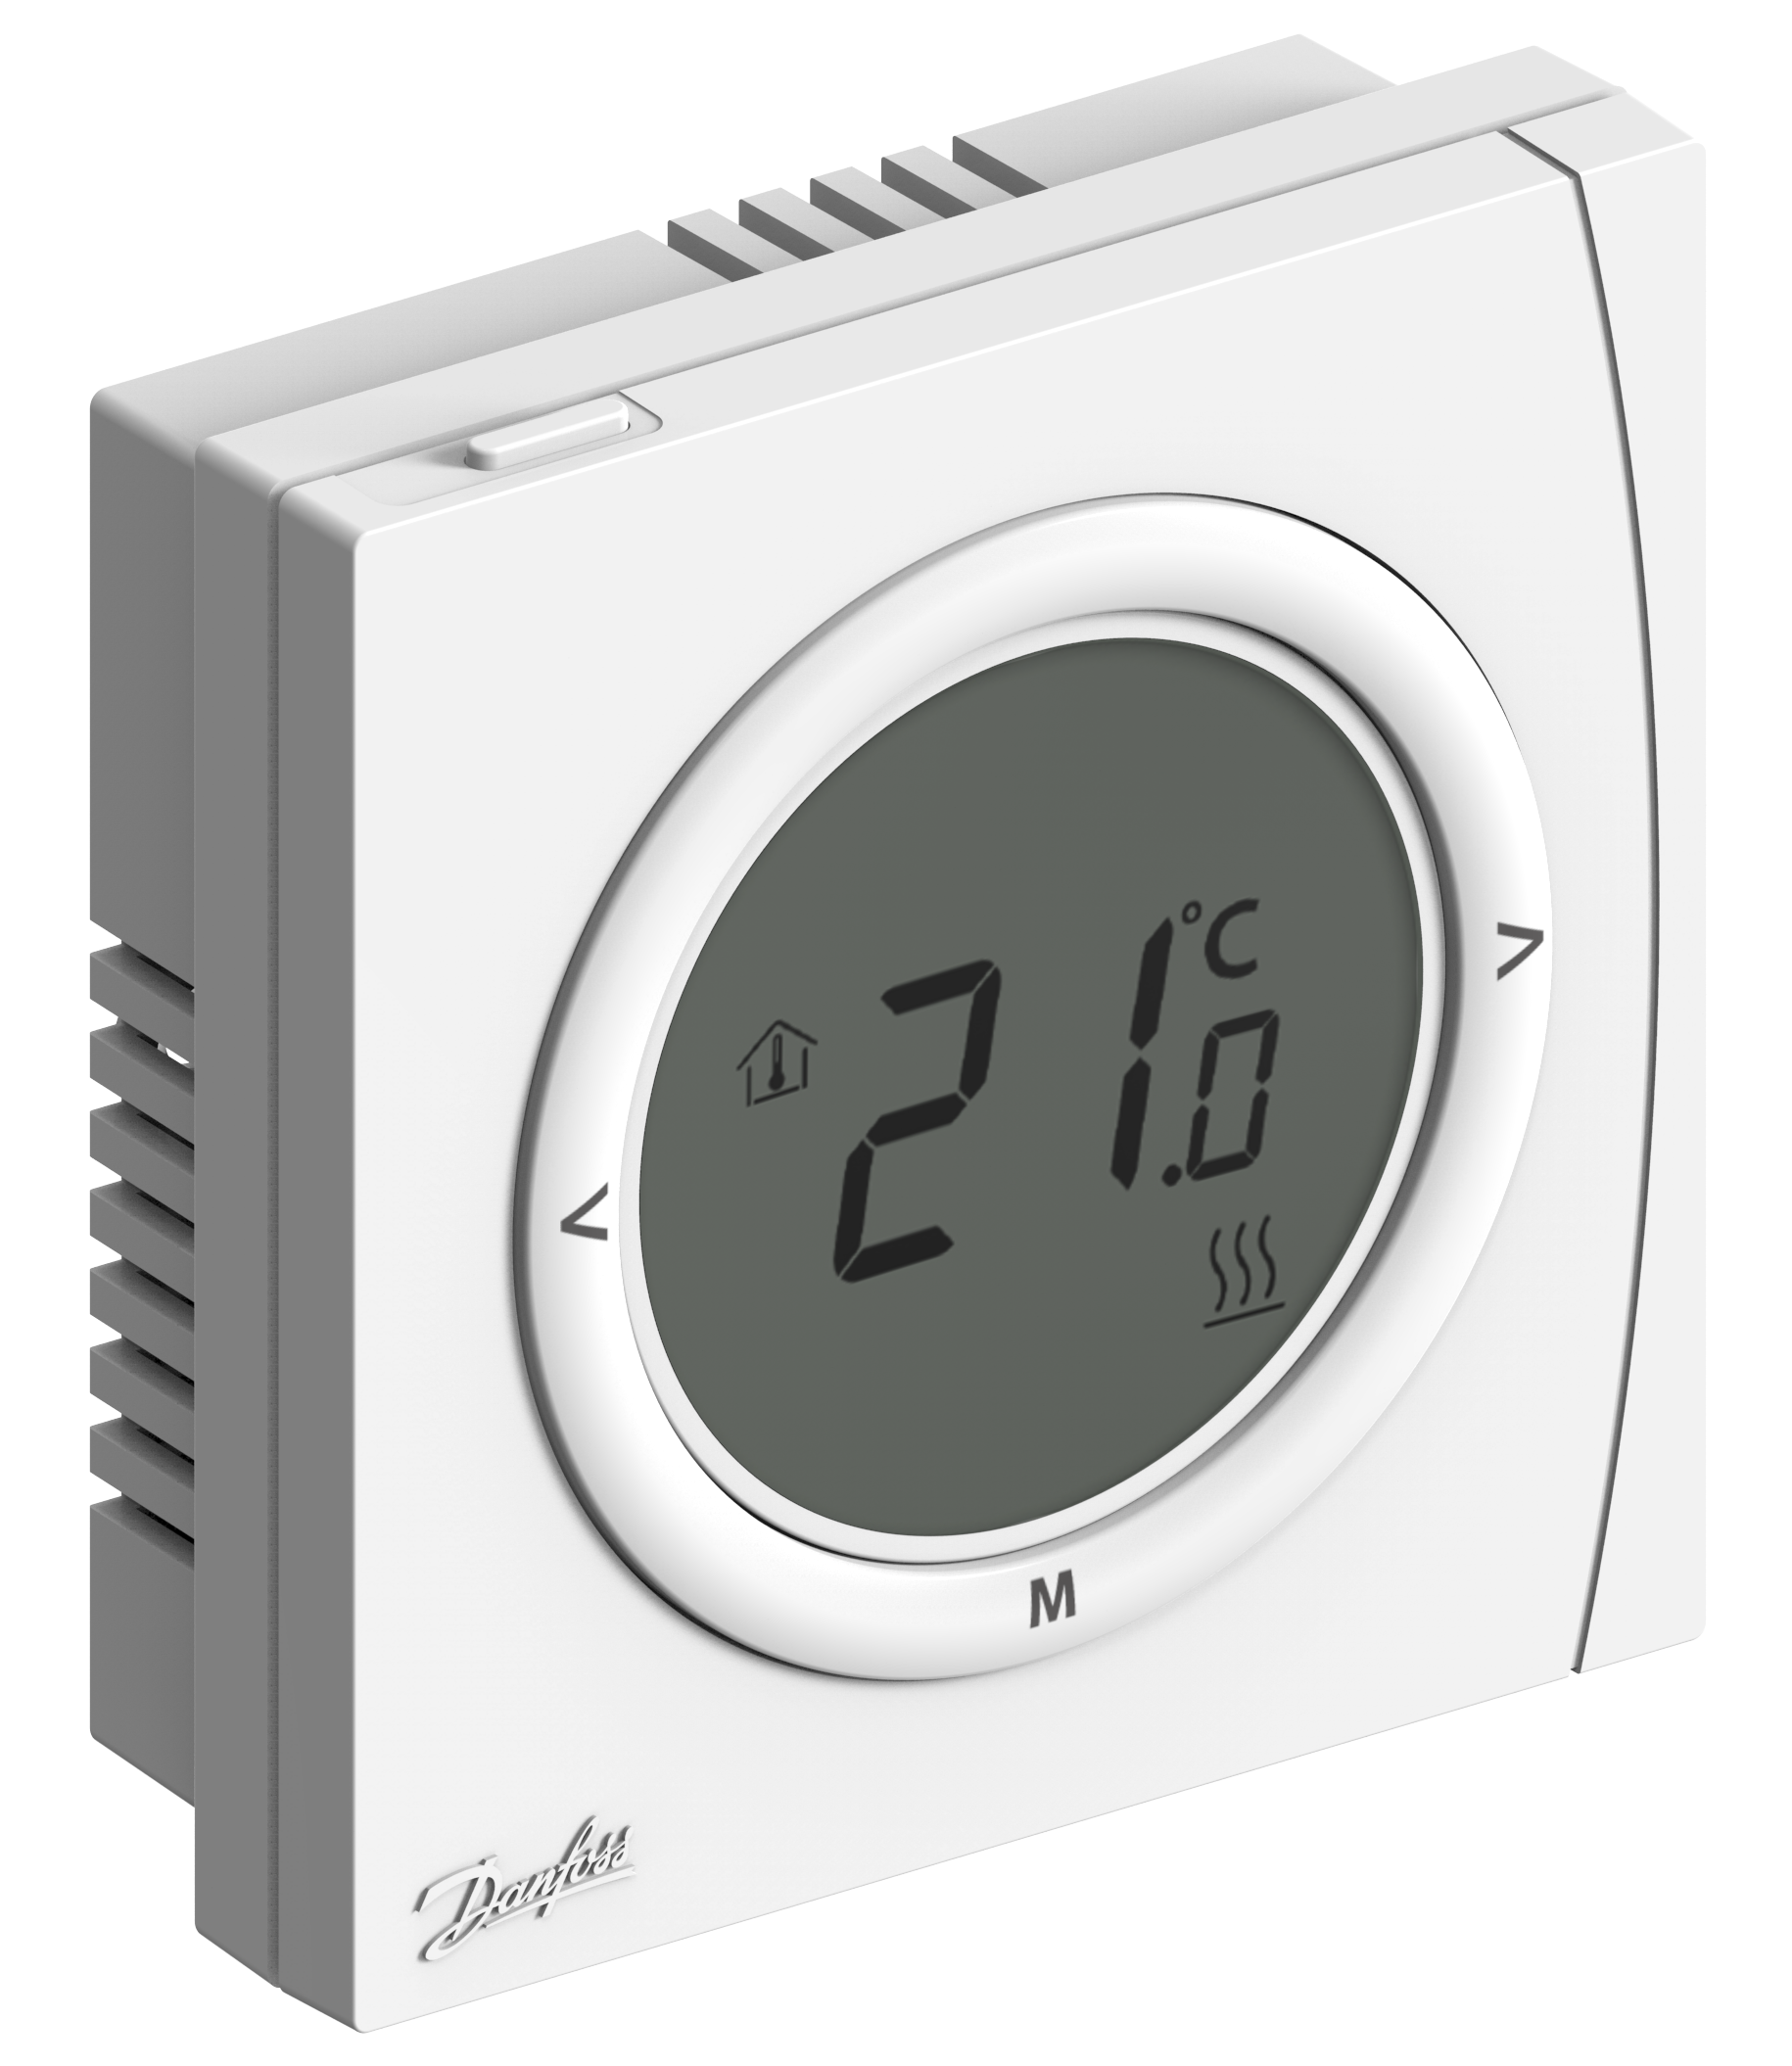 Electronic room thermostat 230v